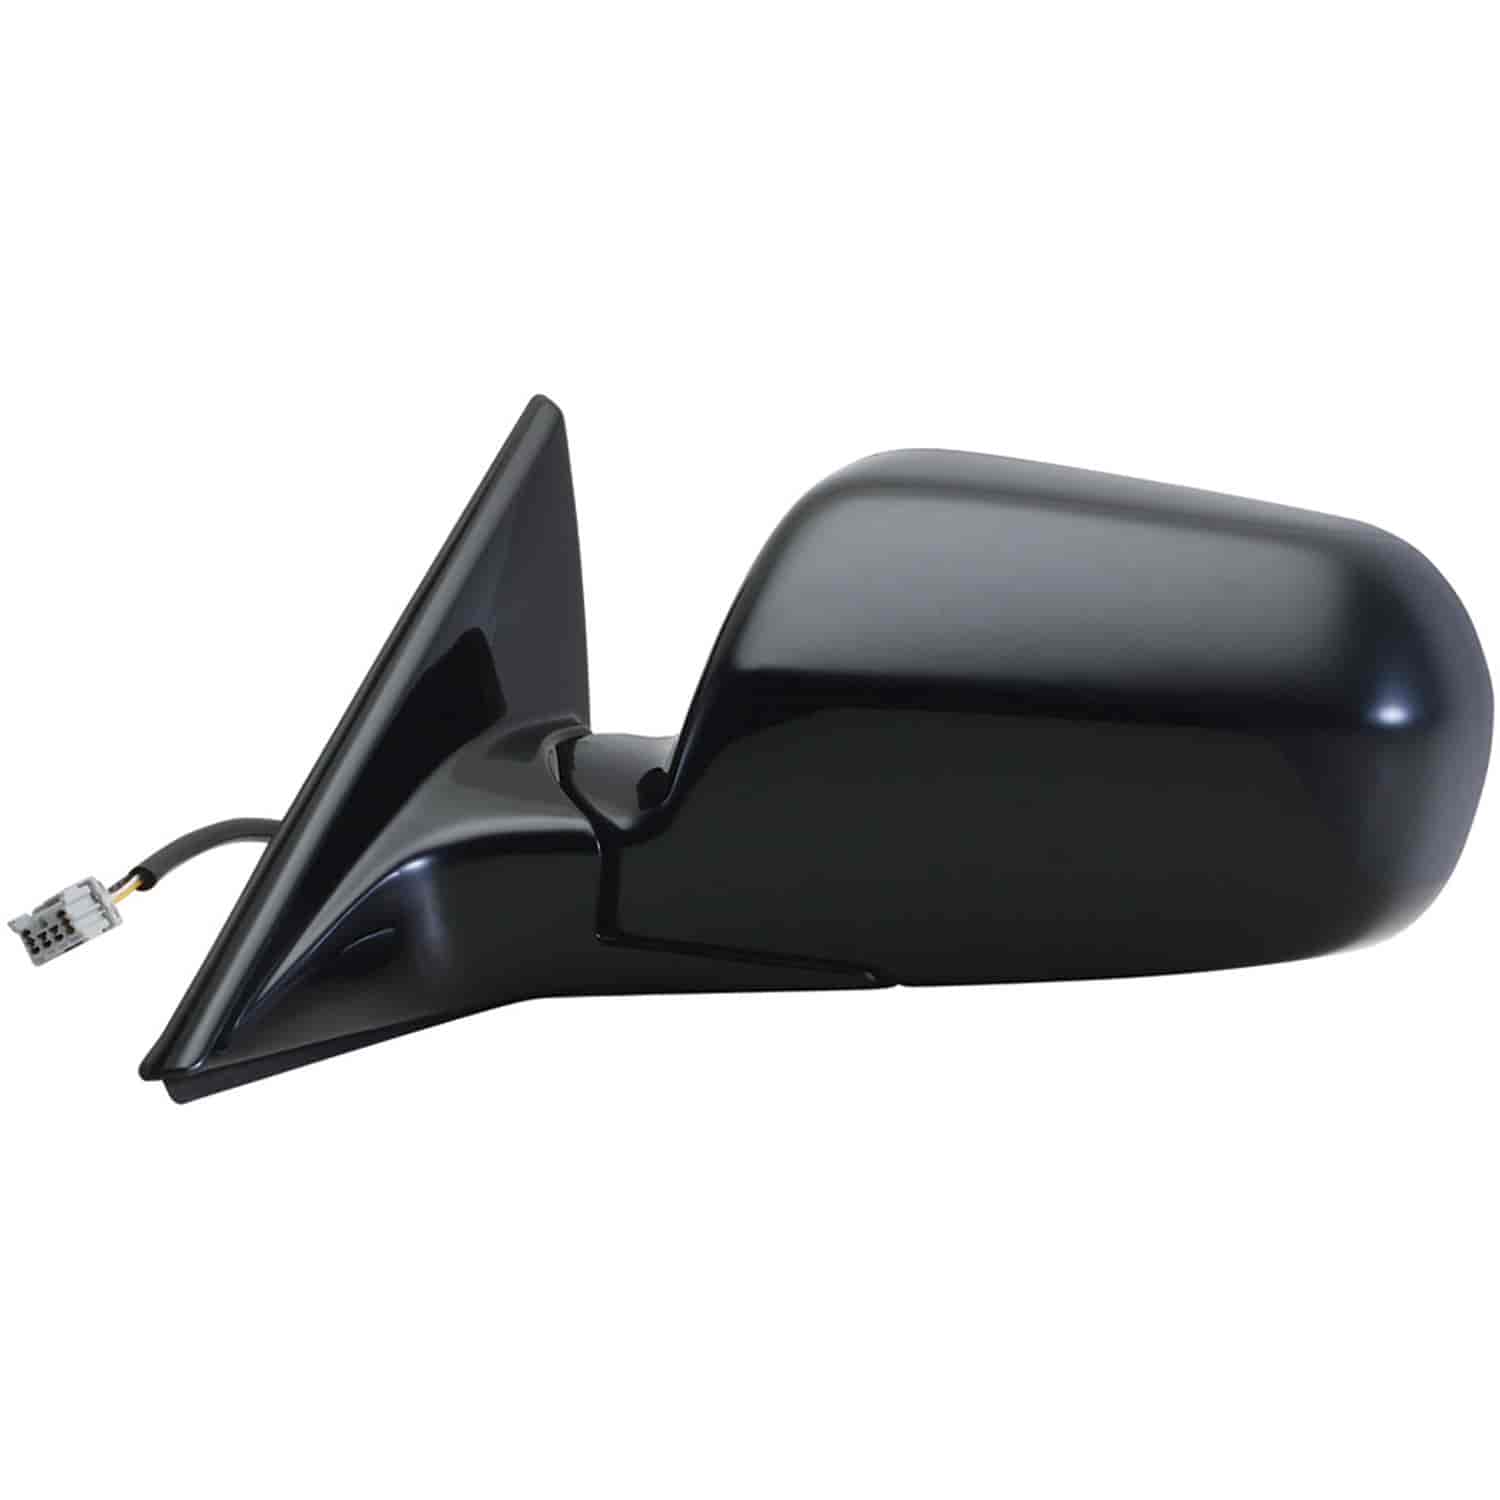 OEM Style Replacement mirror for 99-01 ACURA TL 4 door sedan driver side mirror tested to fit and fu